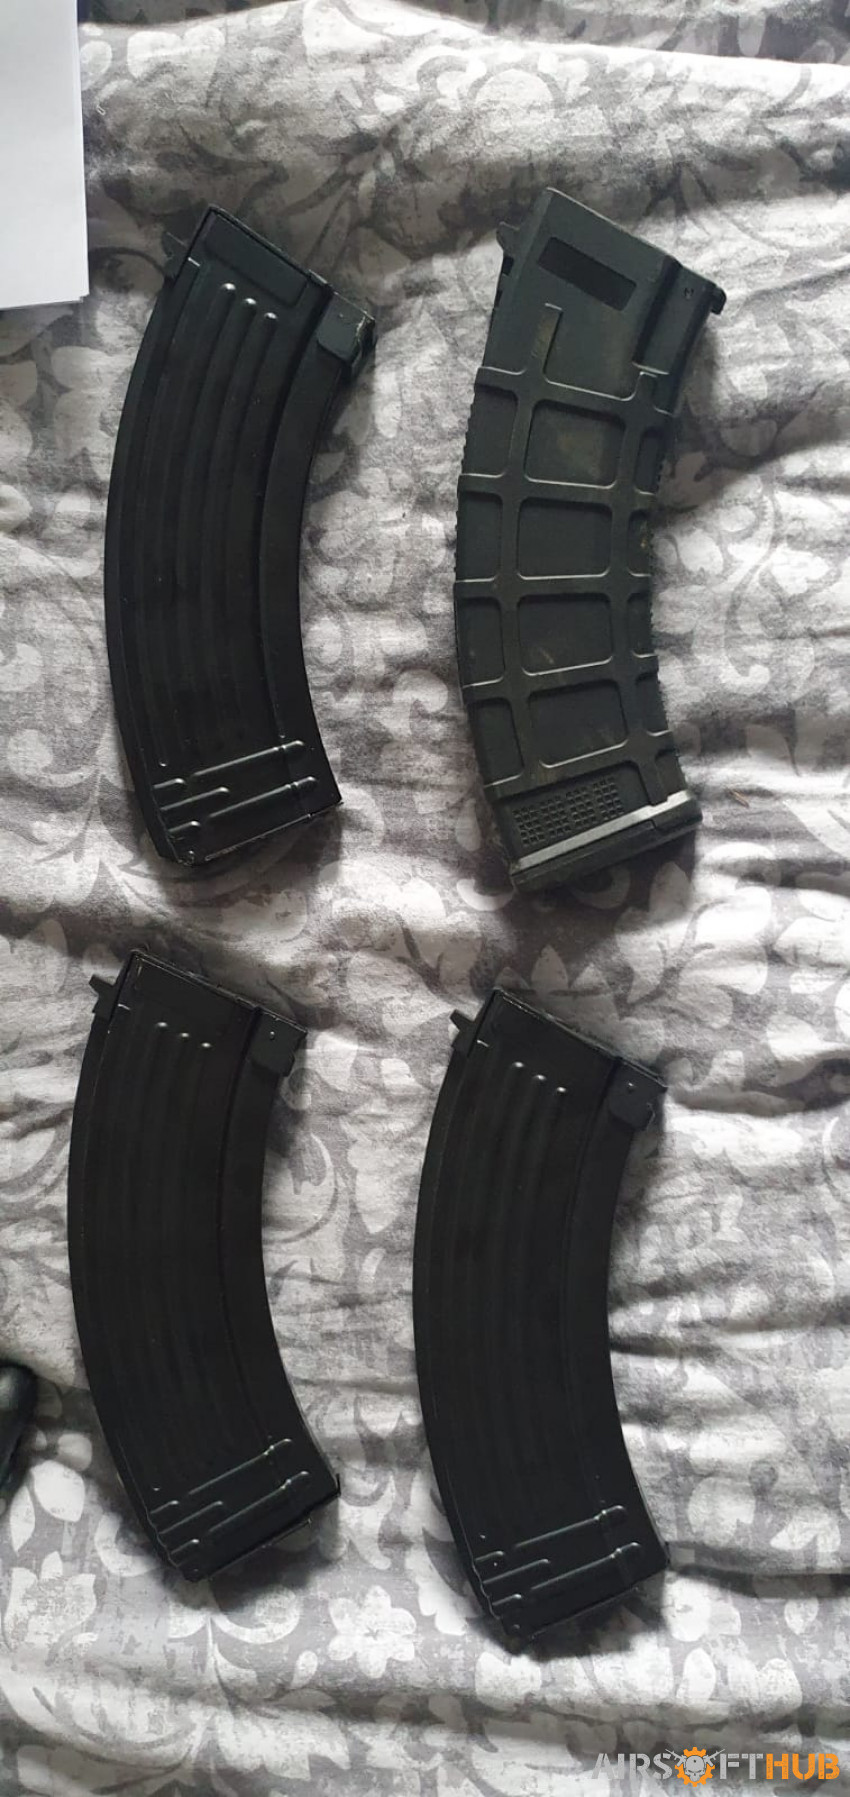 Nuprol Romeo With 4x Mags - Used airsoft equipment